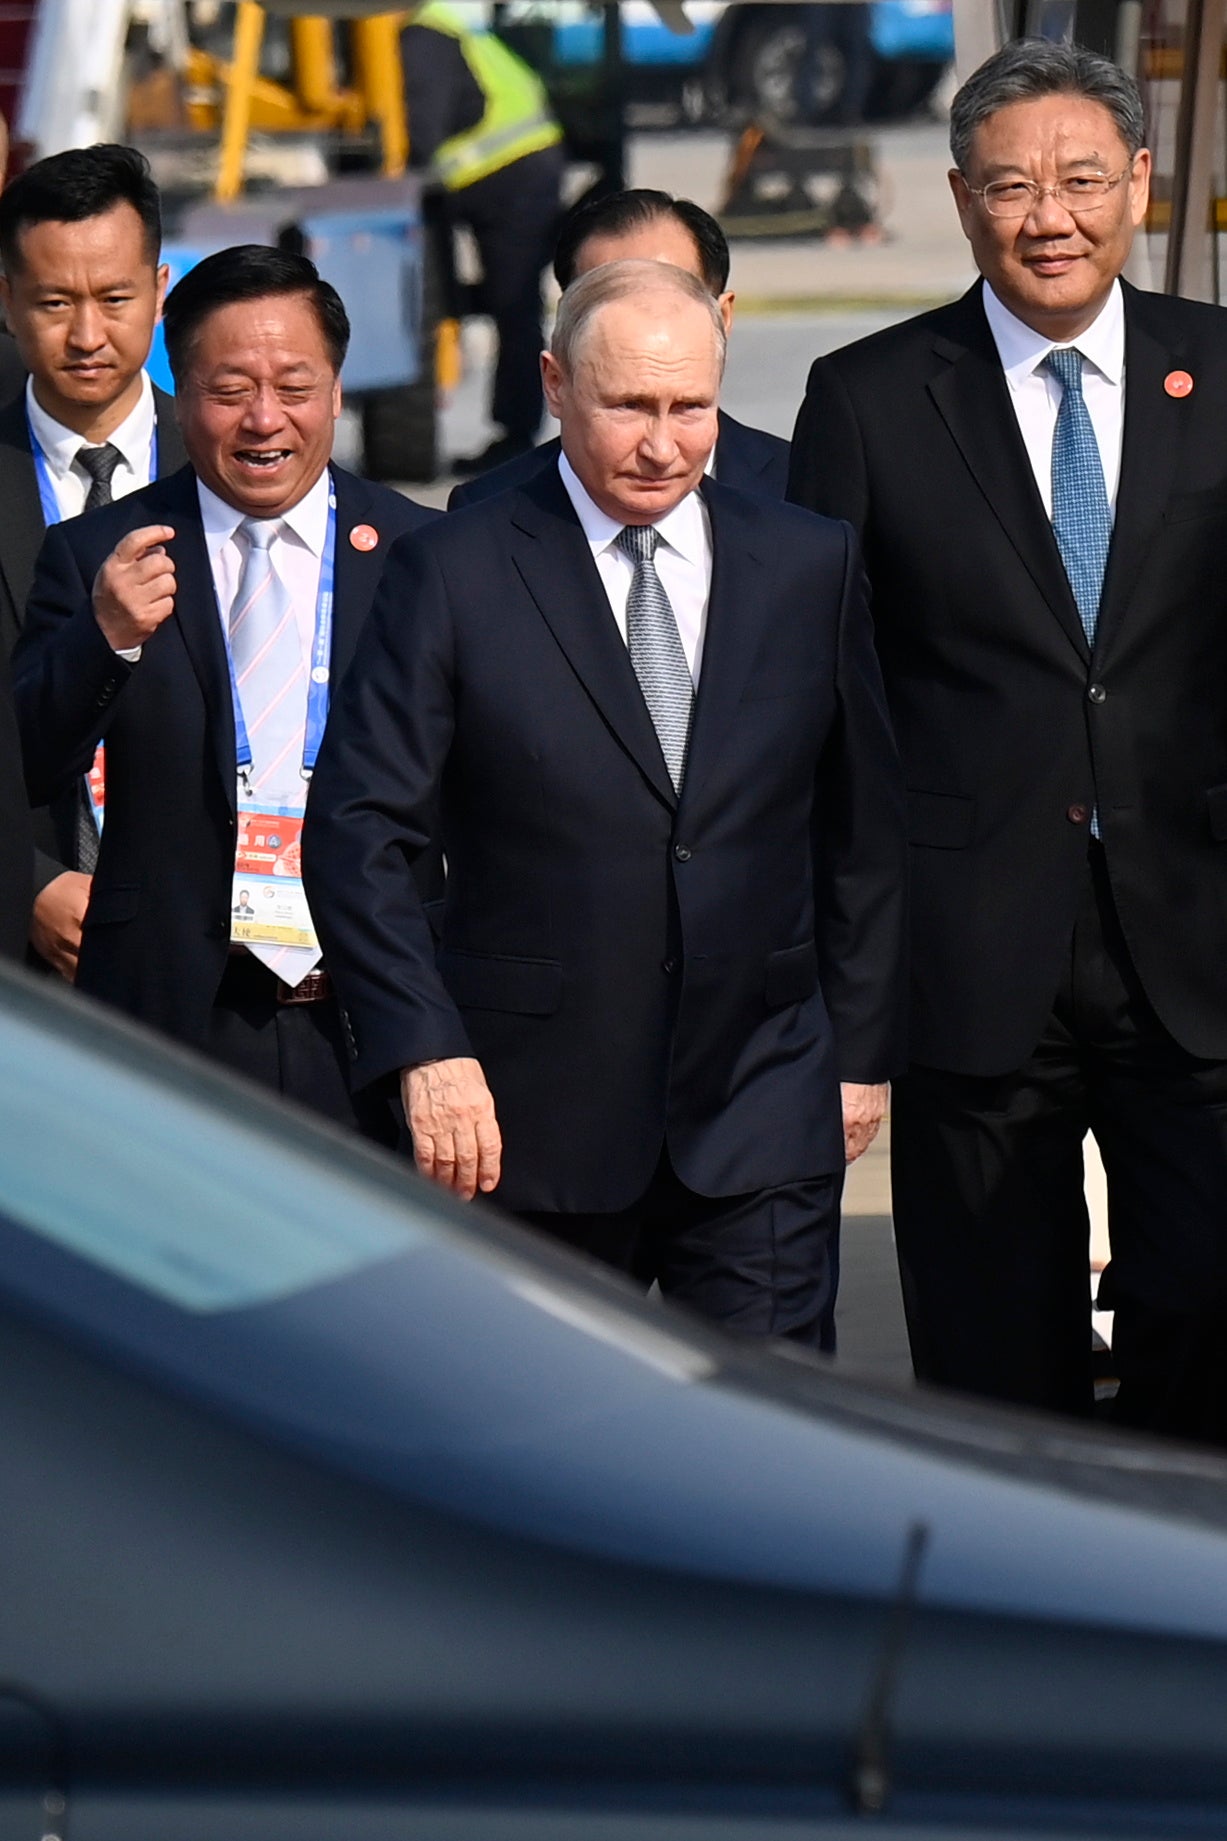 Vladimir Putin has come to Beijing for a two-day visit